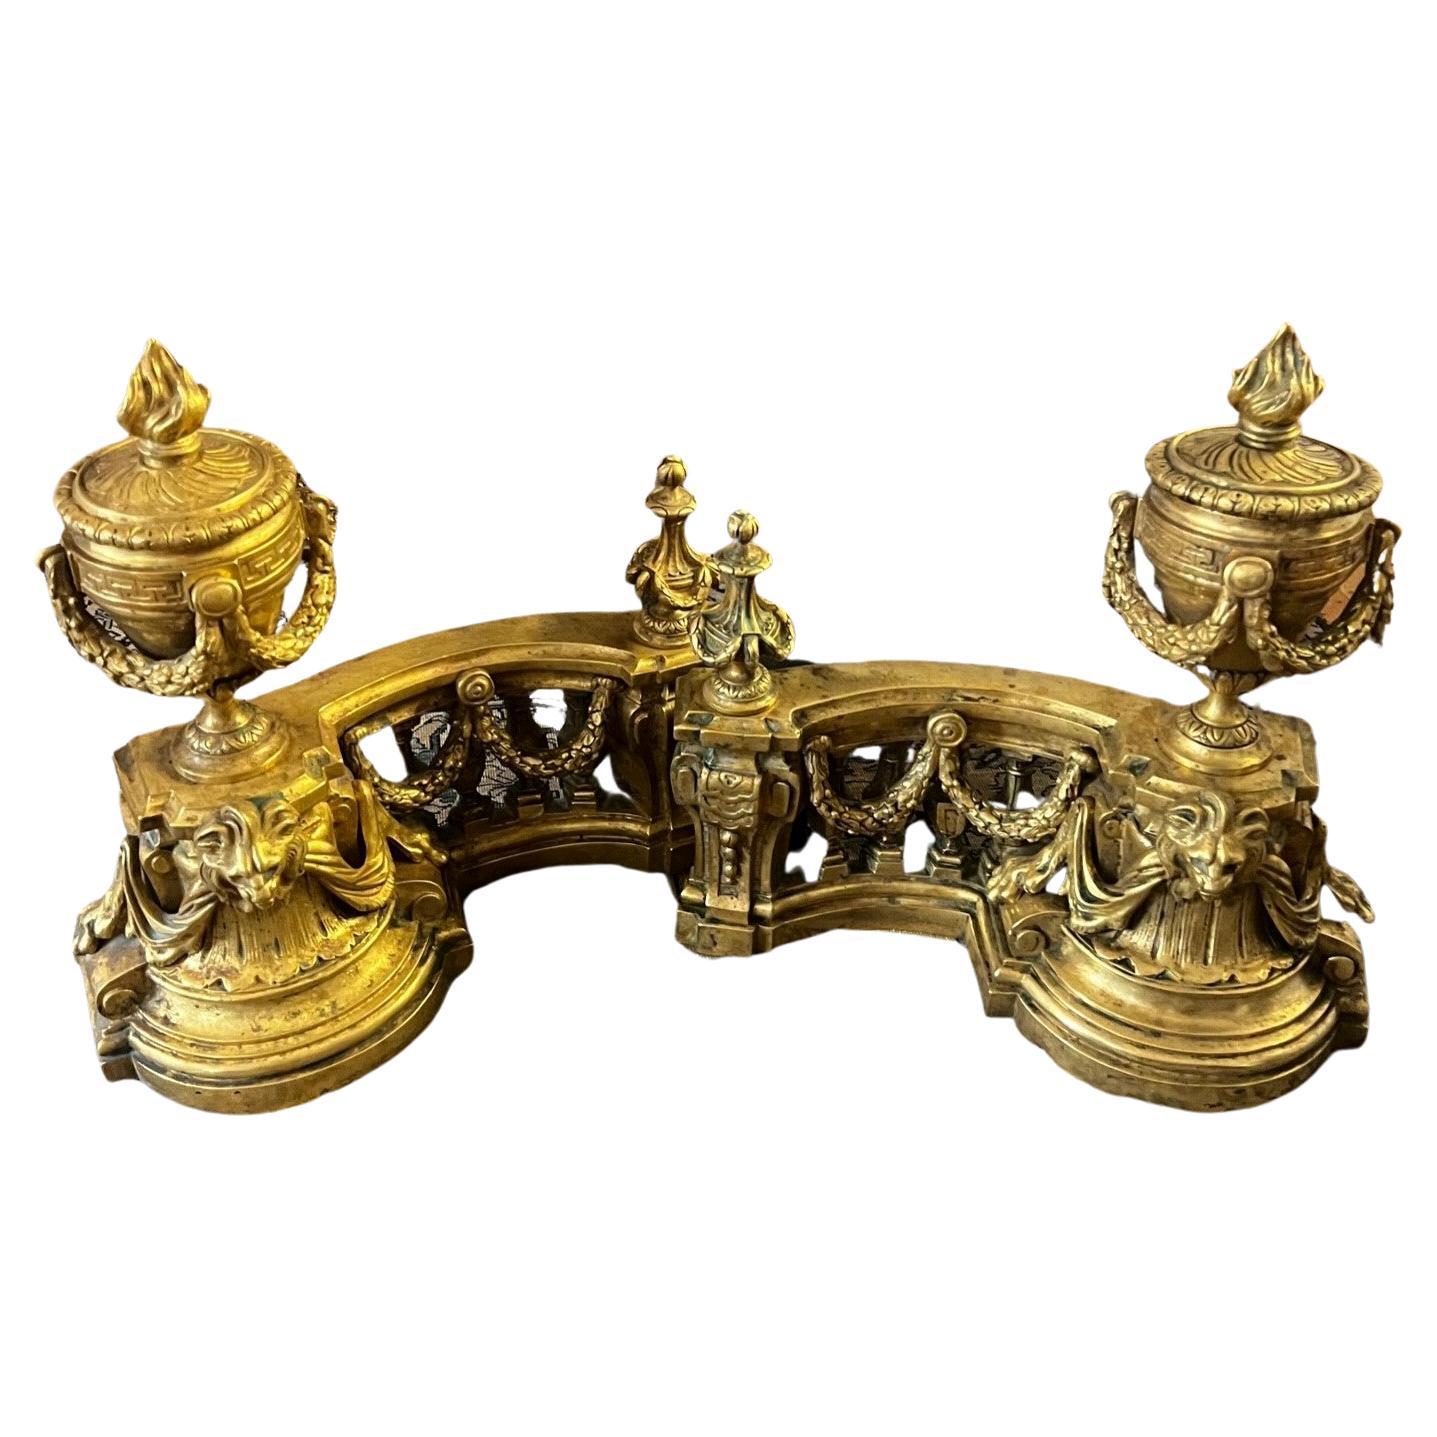 Pair of Antique French 18th Century Gilt Bronze Firedogs/Chenets For Sale